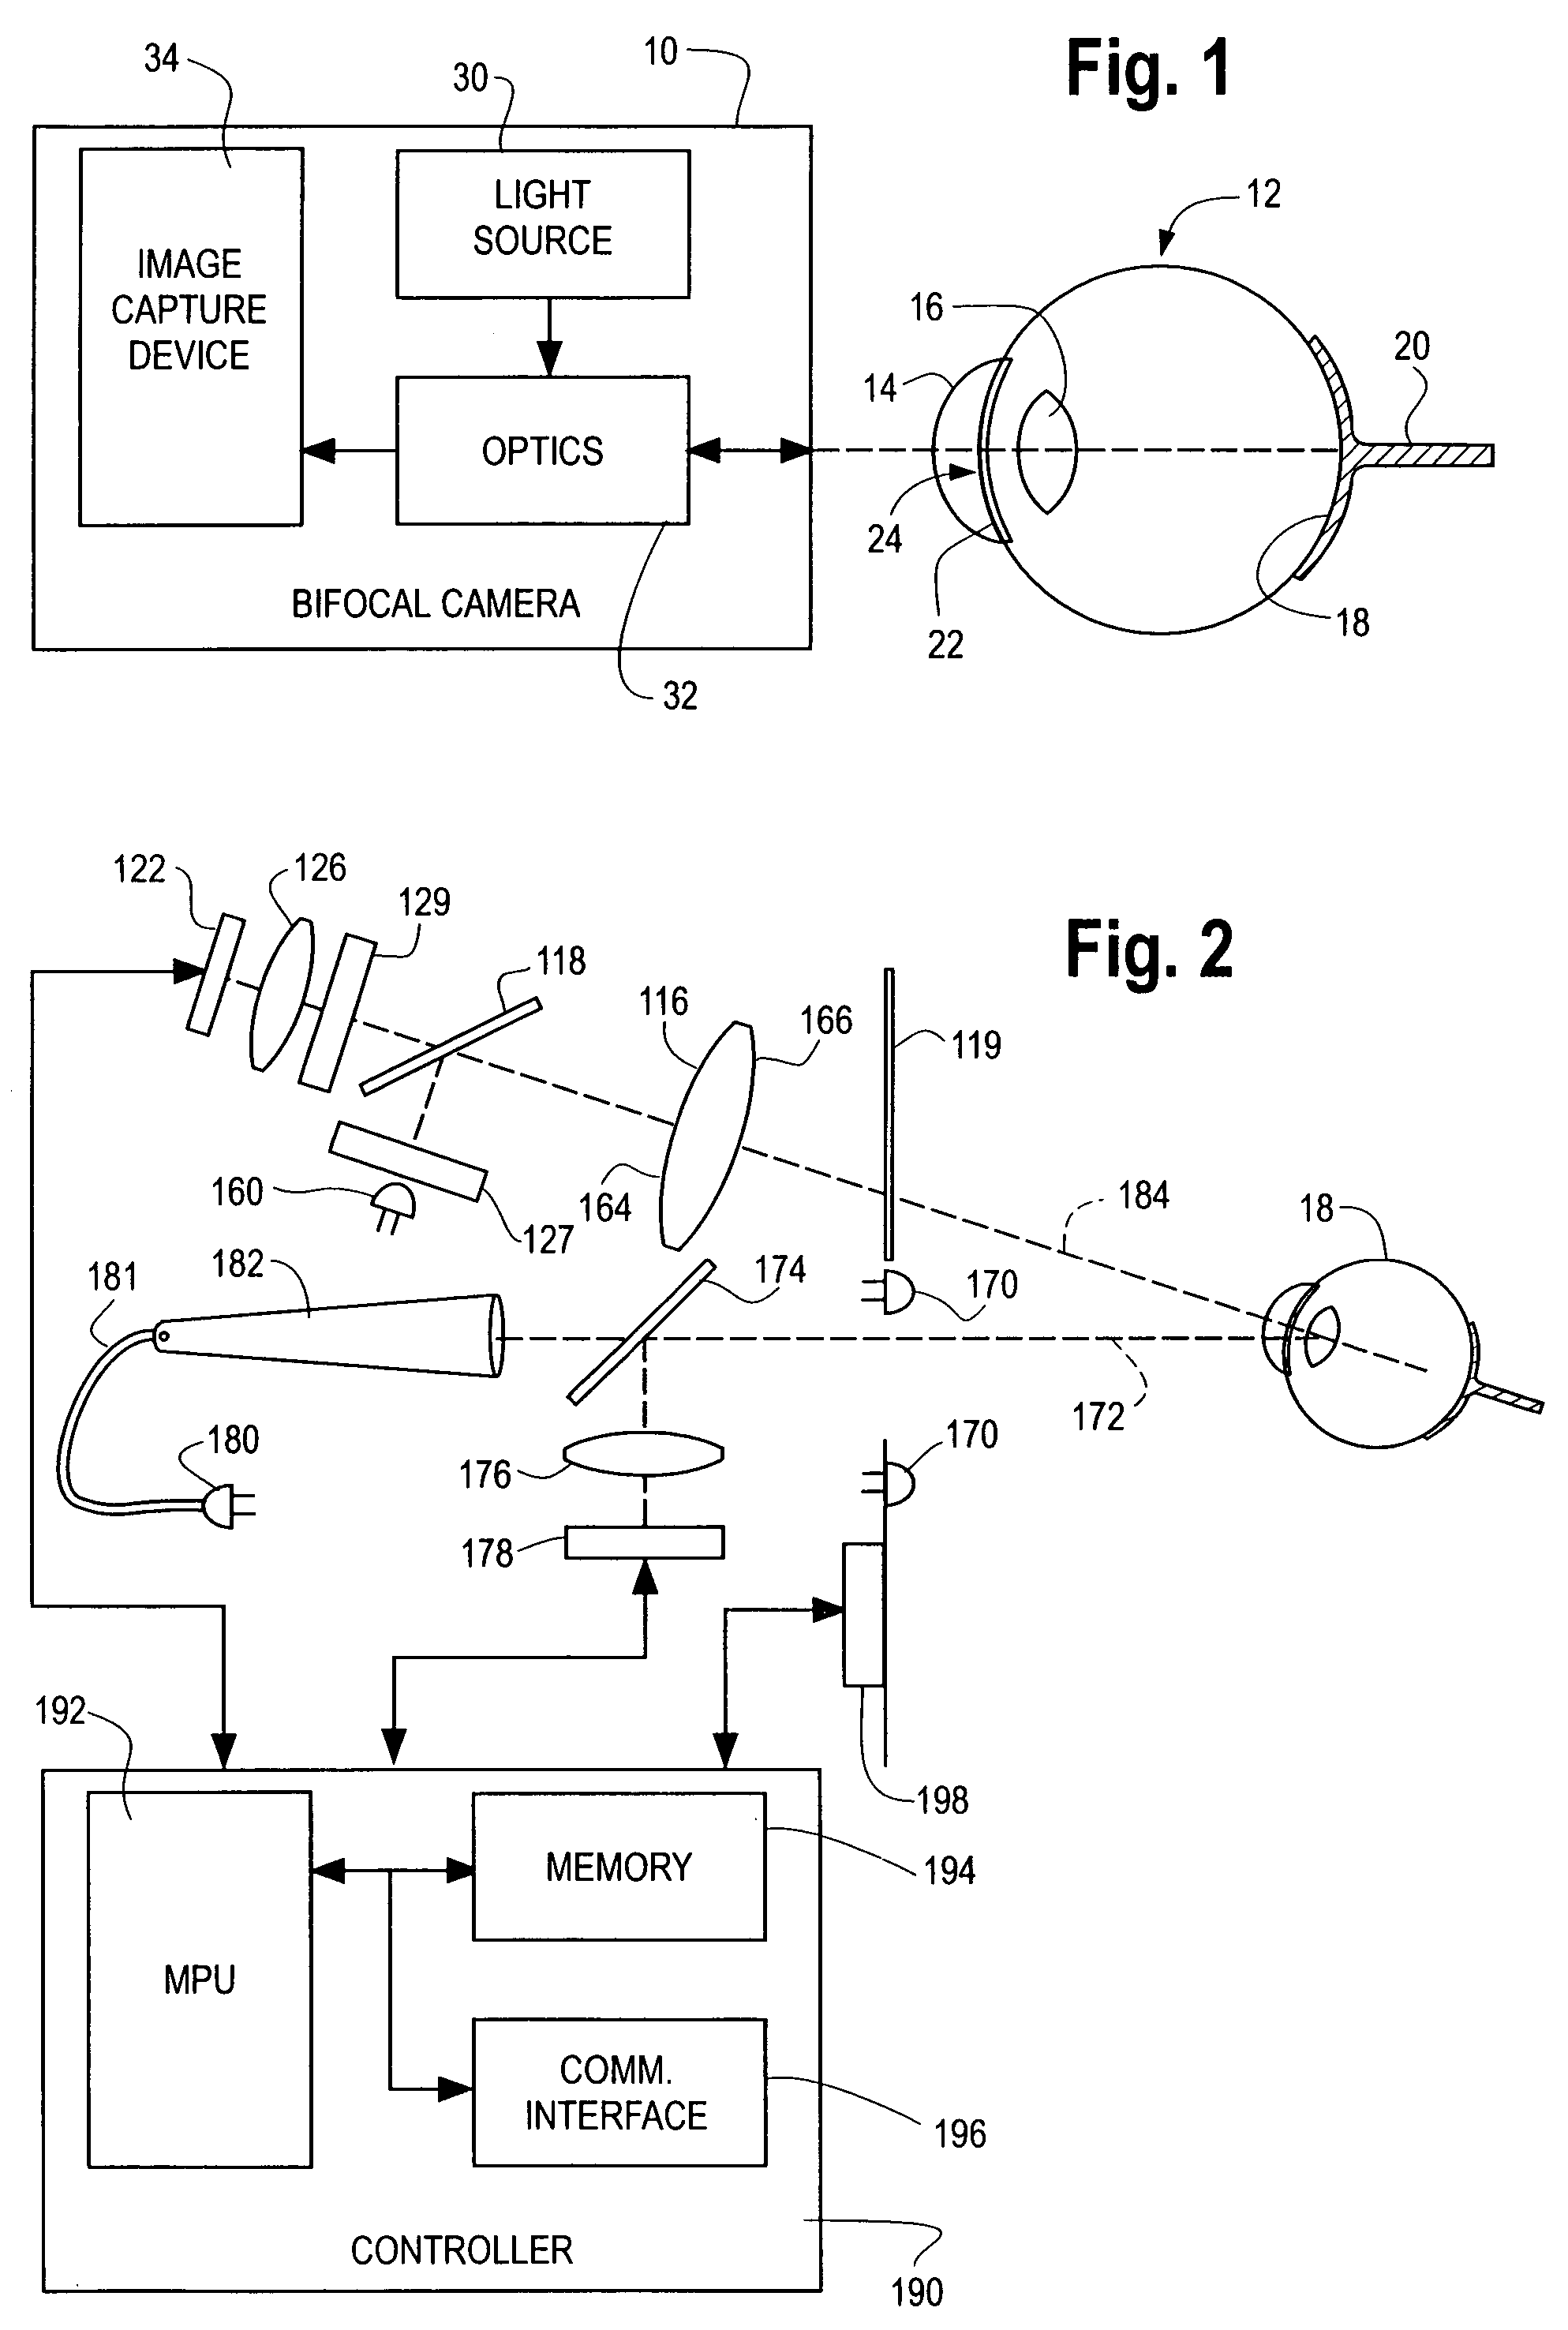 Method and system for generating a combined retina/iris pattern biometric